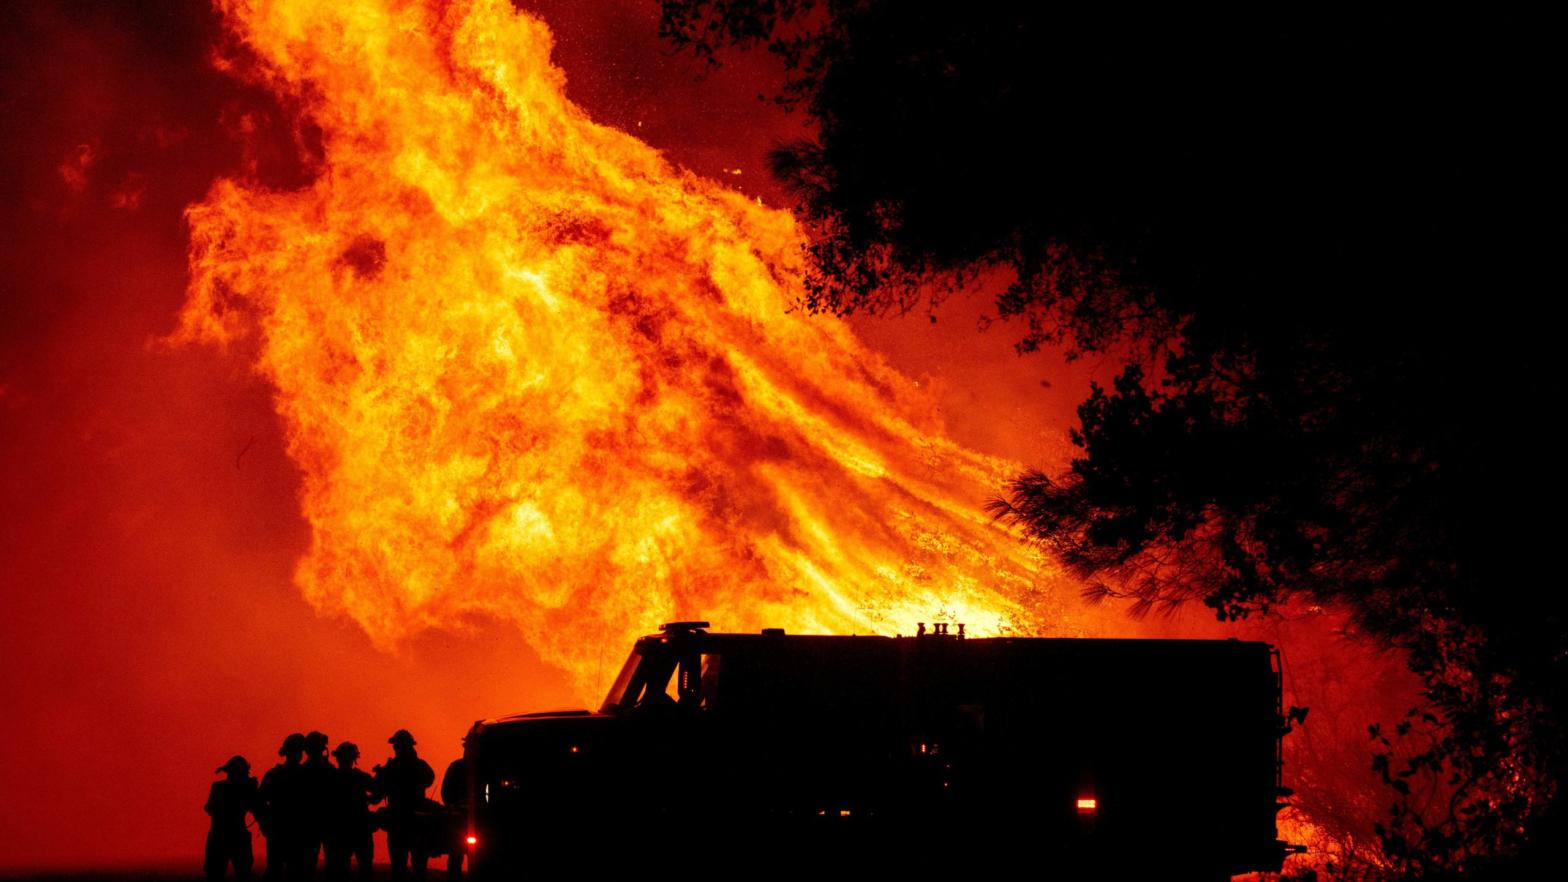 Butte county firefighters watch as flames tower over their truck at the Bear Fire in Oroville, California on Sept. 9, 2020.  (Photo: Josh Edelson/AFP, Getty Images)